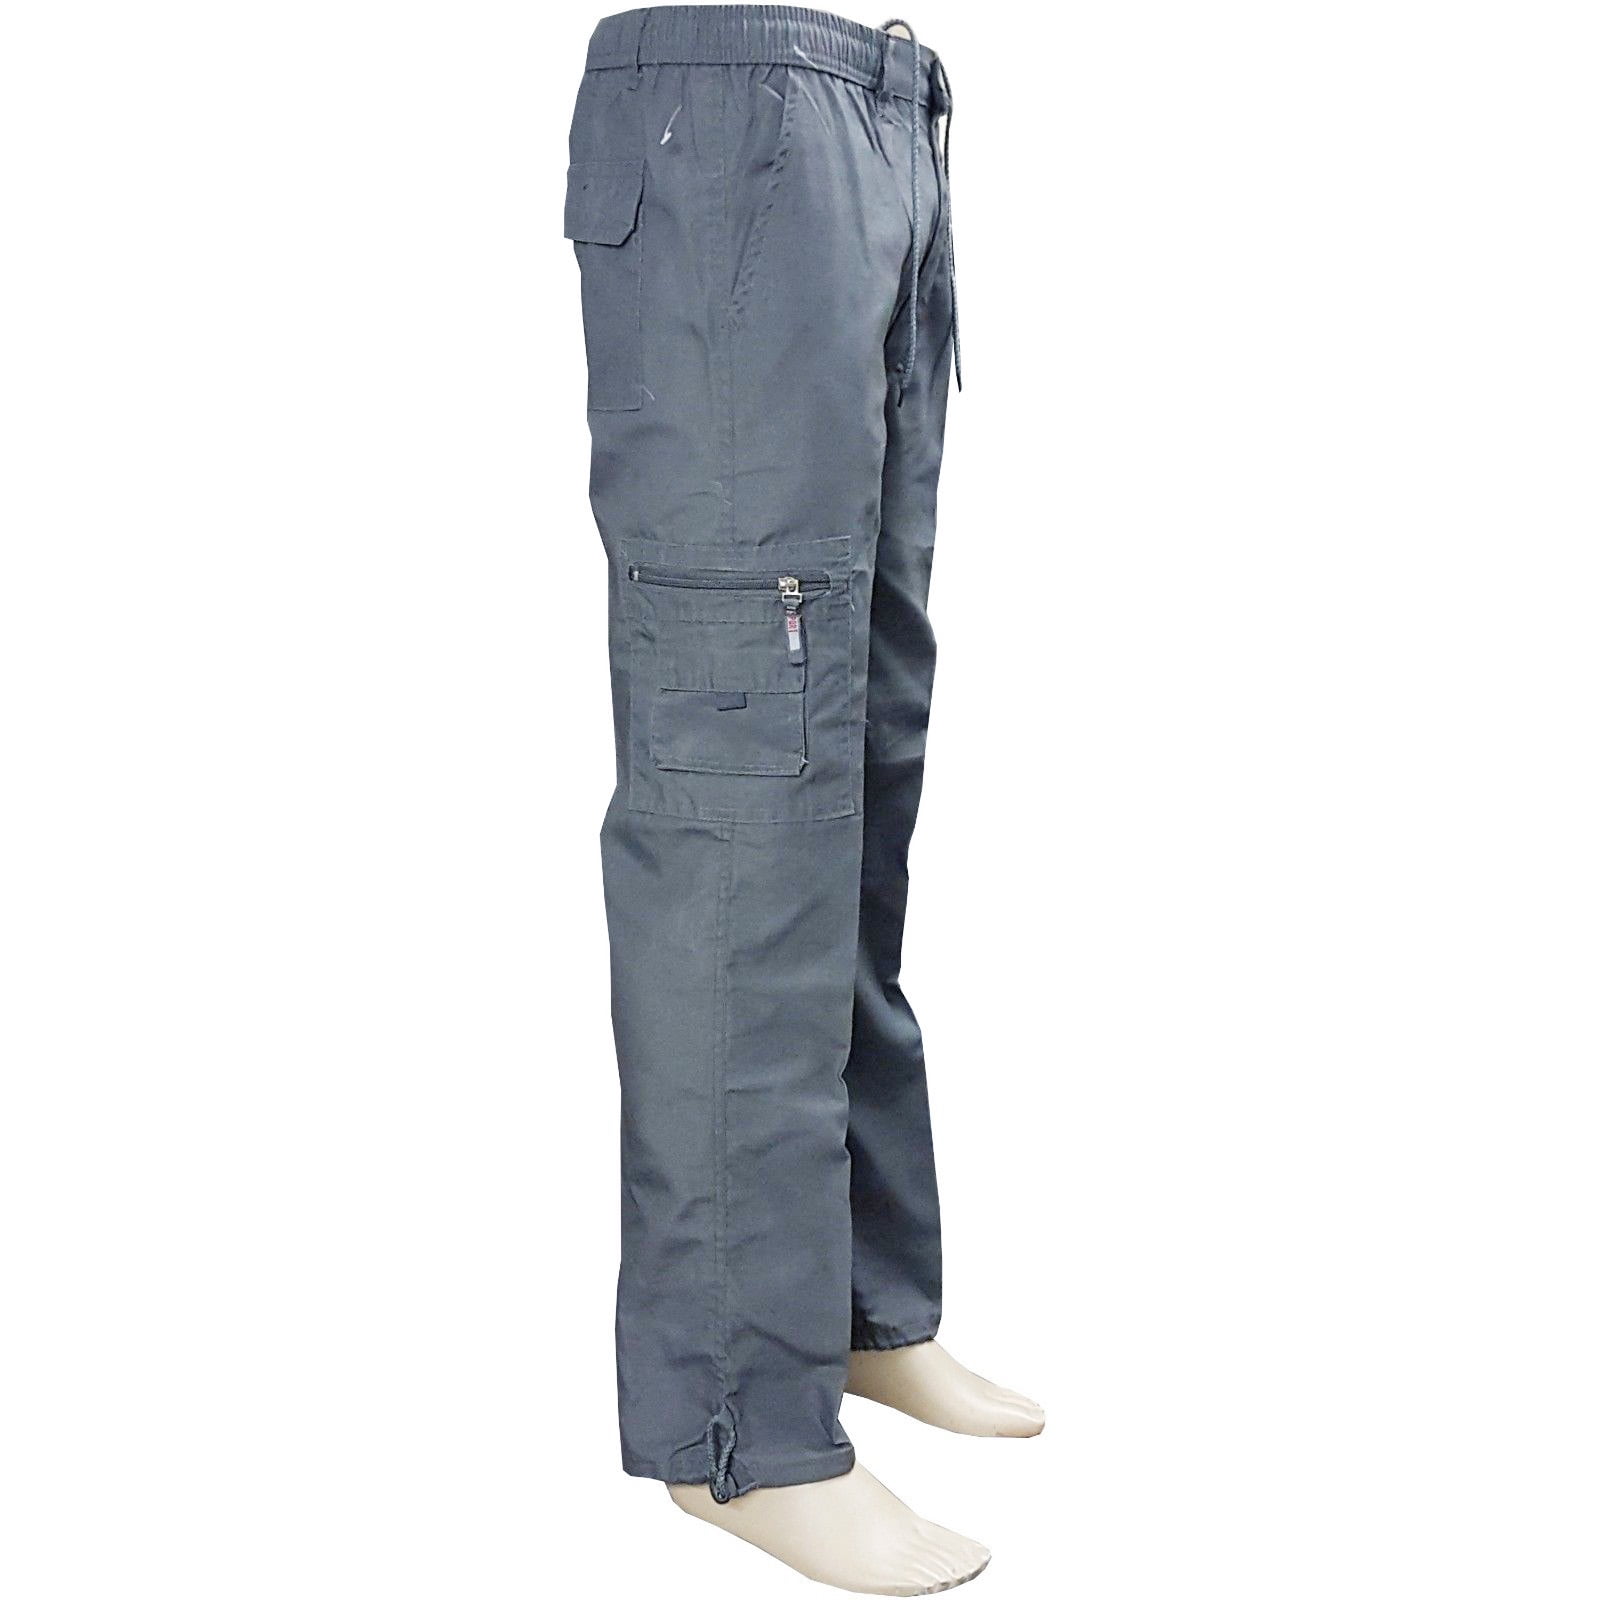 Mens Cargo Work Trousers Heavy Duty Combat with Knee Pad Pockets Pro Tuff Stuff 